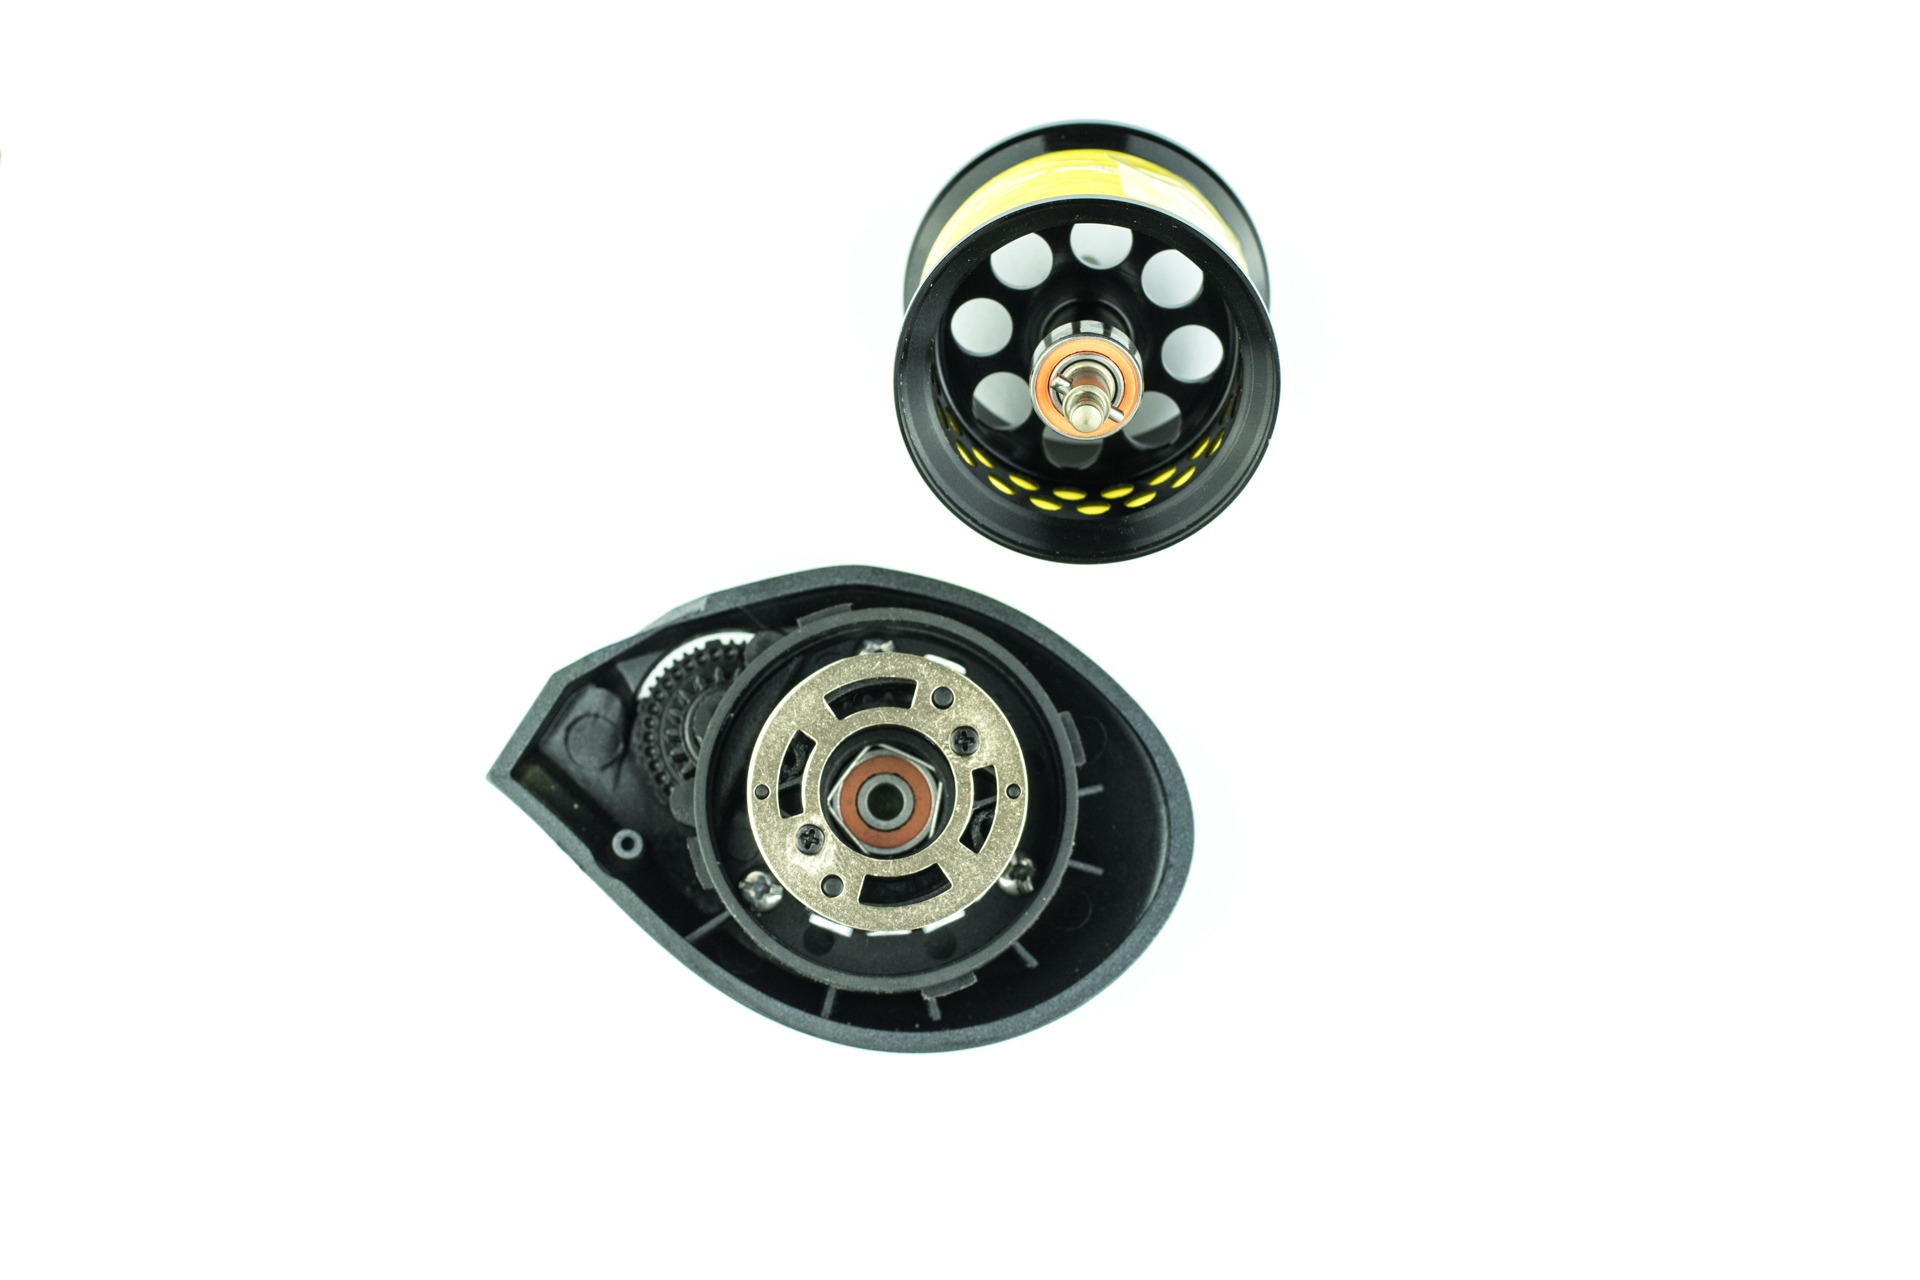 Spool and brakes for the Fishband GH100 bfs reel